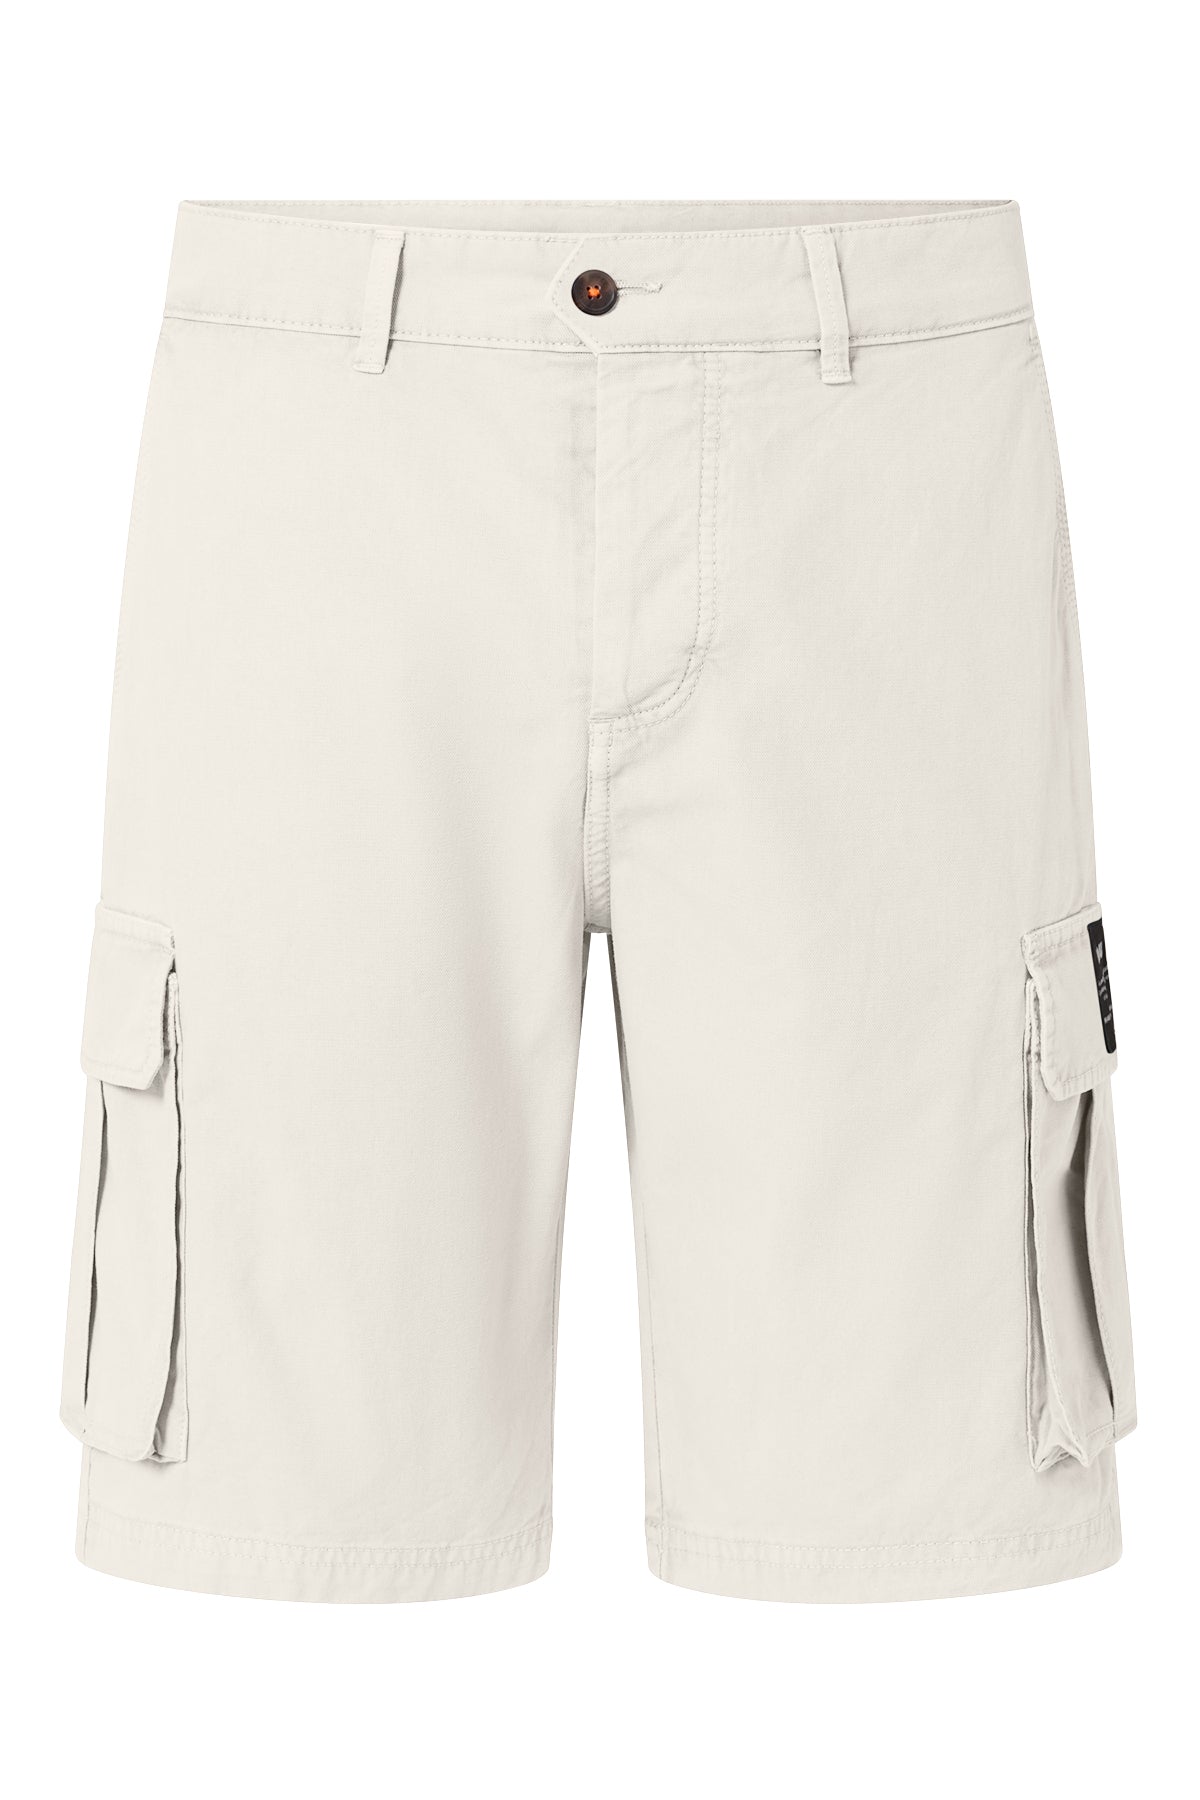 SHORTS LIMA WEISS